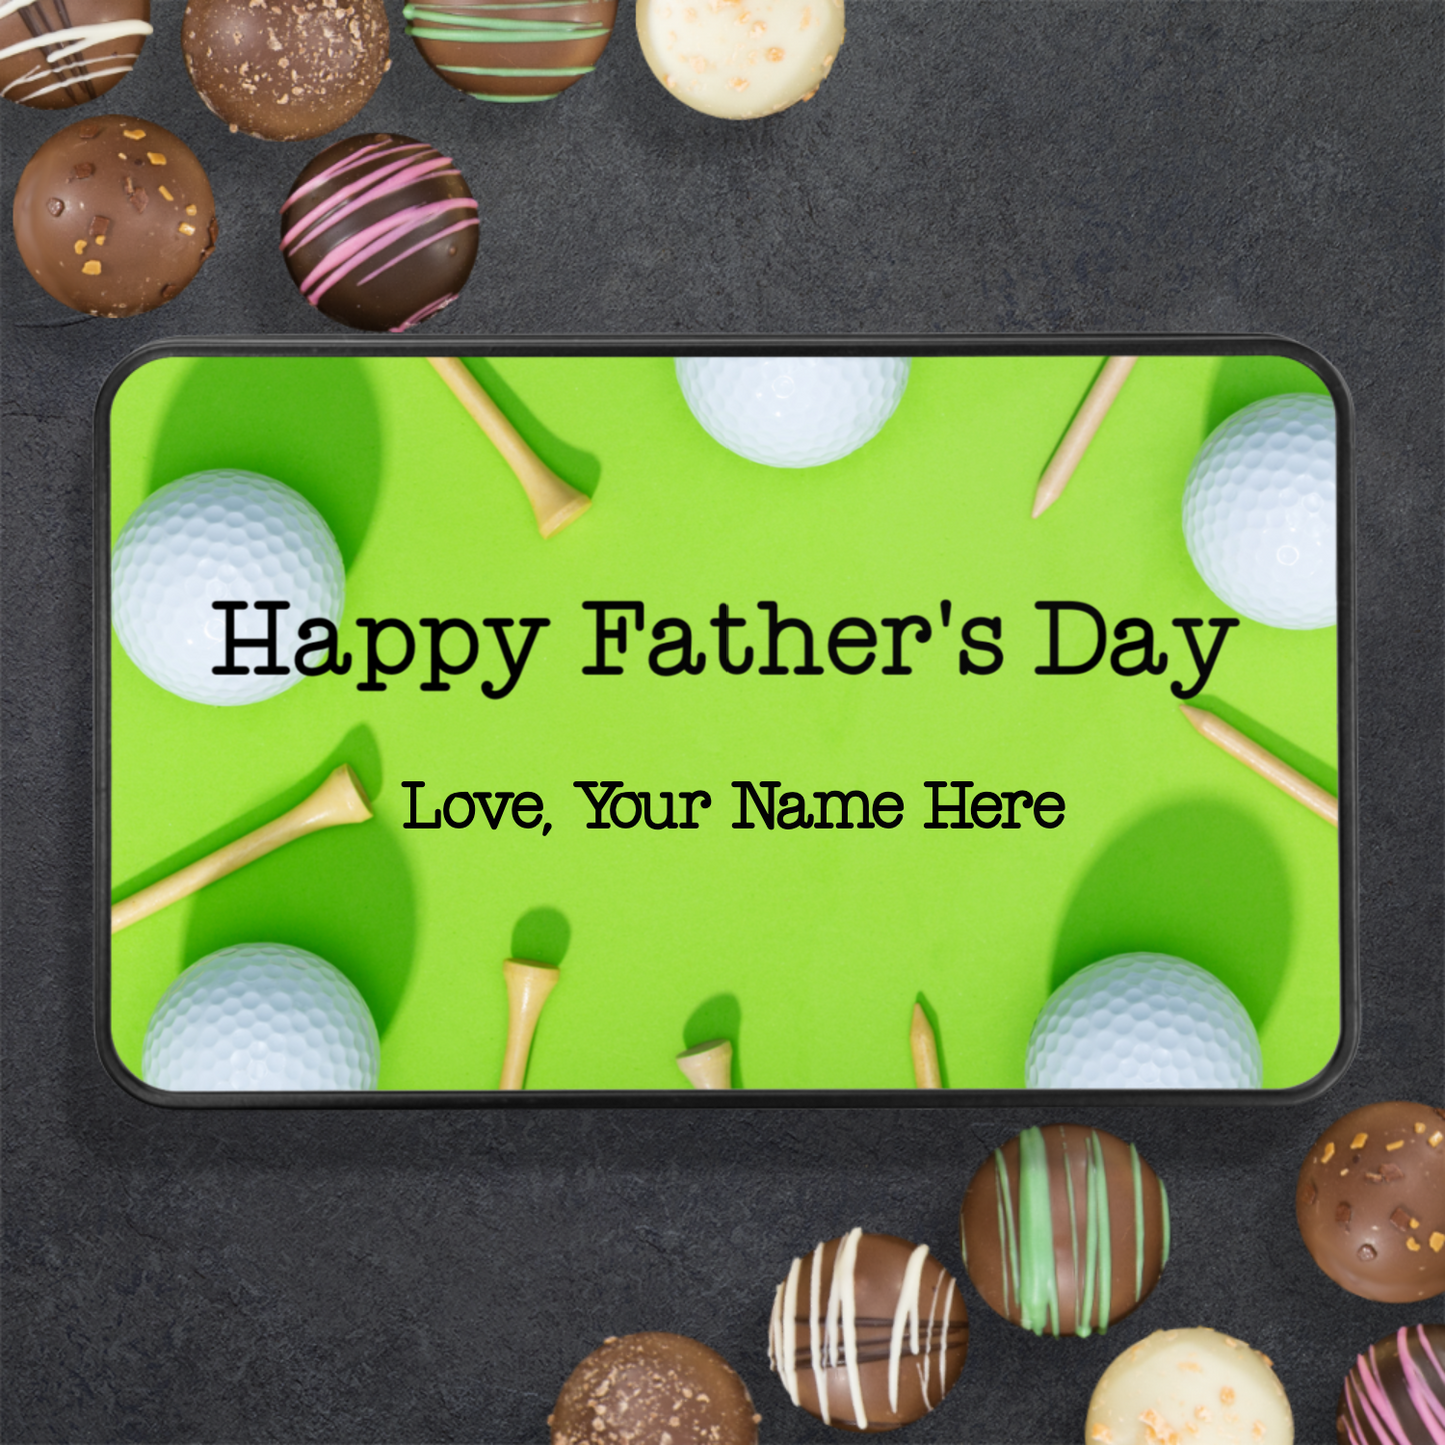 Father's Day Golf Gift for Dad - Personalized Chocolate Candy Gift for Father Grandfather